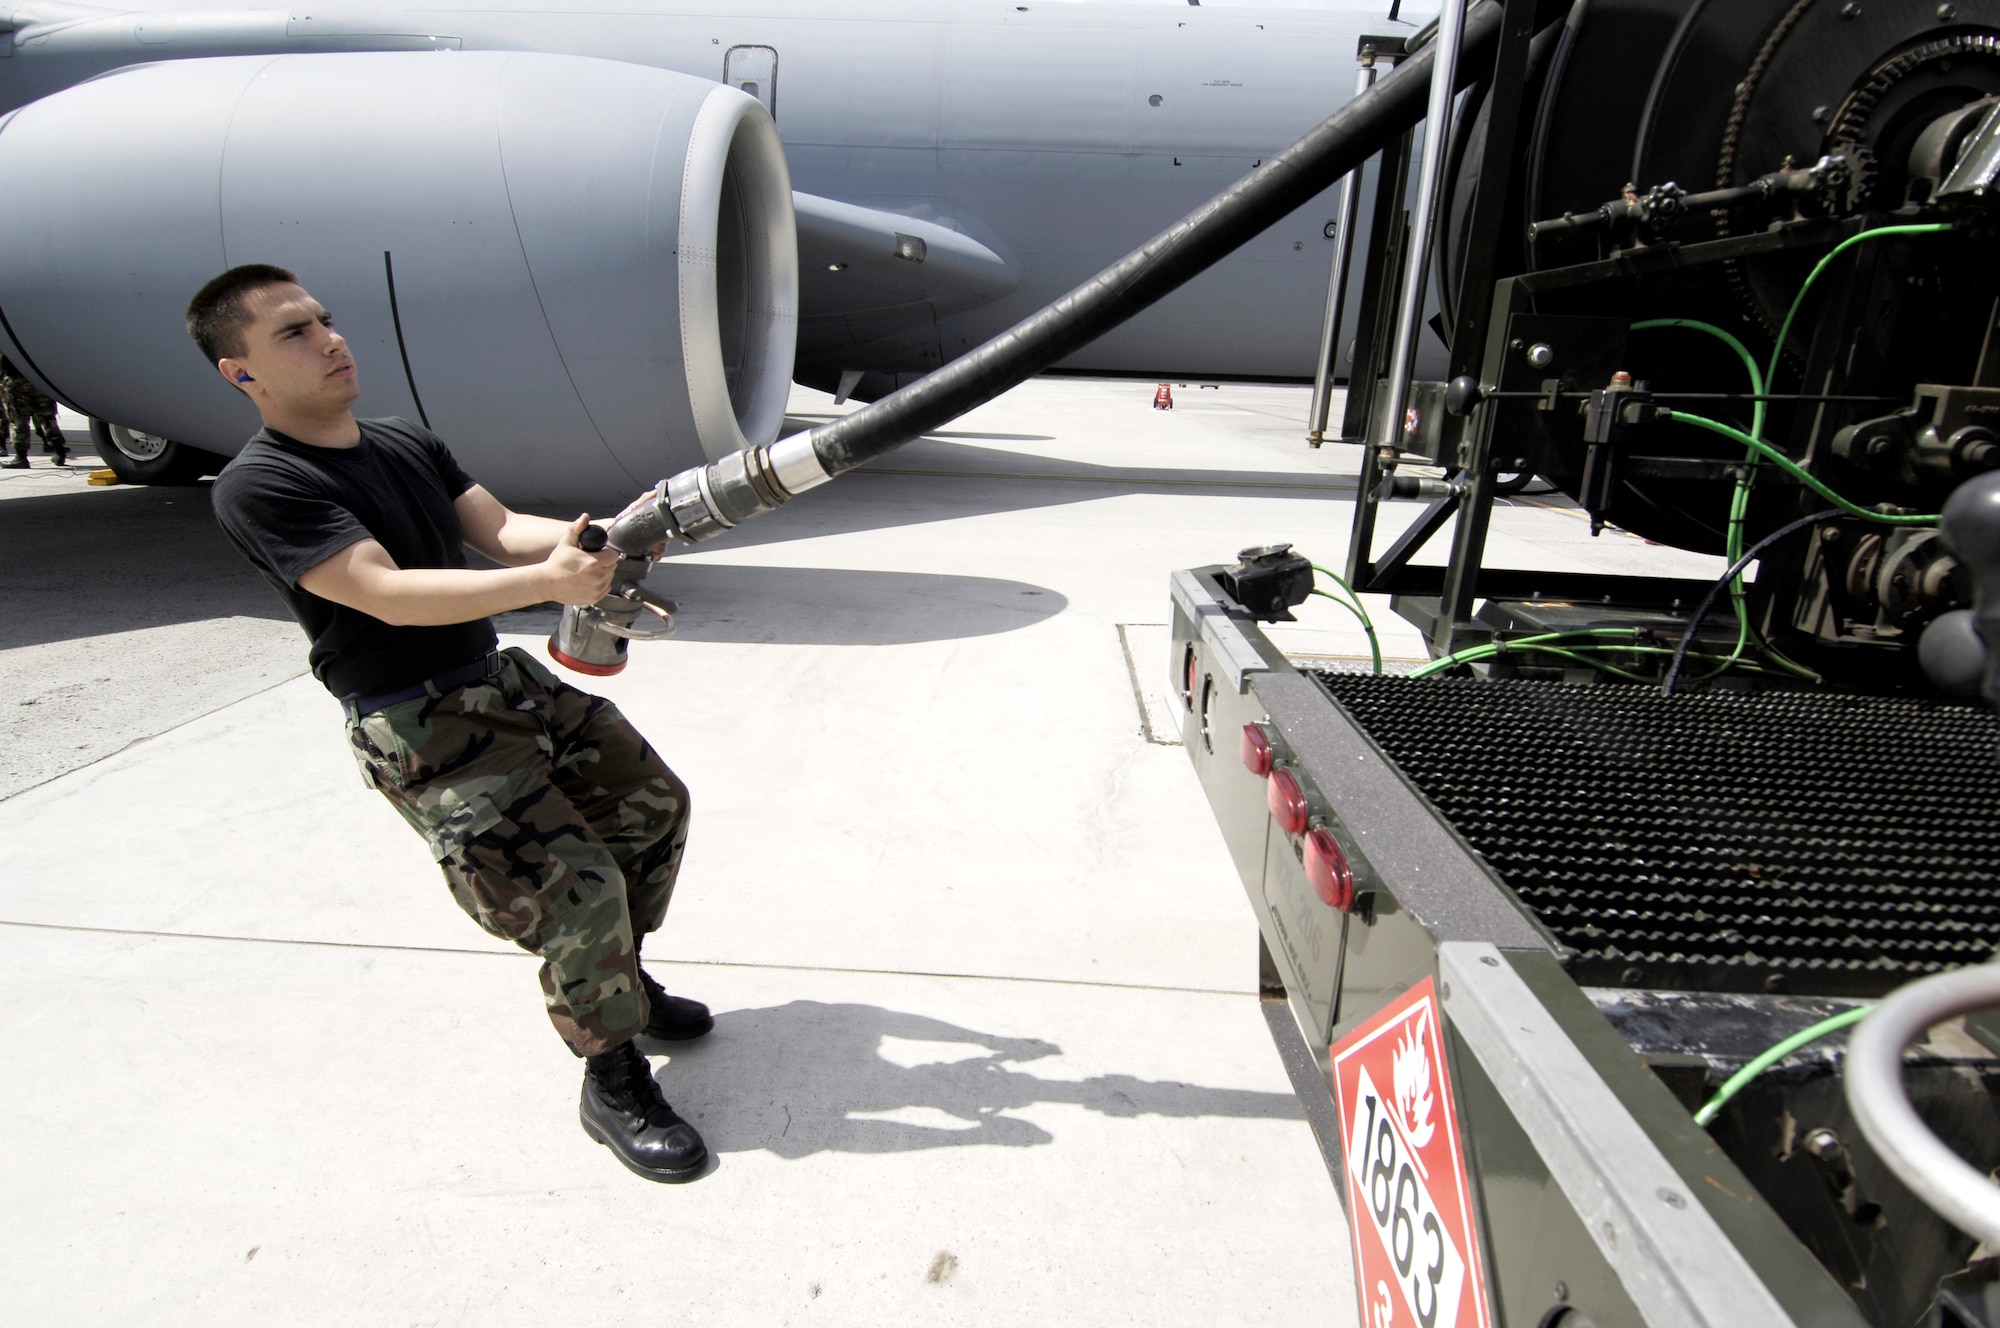 Airman Richard Hedden, 92nd Logistics Readiness Squadron fuels specialist, pulls out a single point fuel line as he prepares to refuel a KC-135. The hydrant service vehicle is capable of pumping up to 750 gallons per minute.